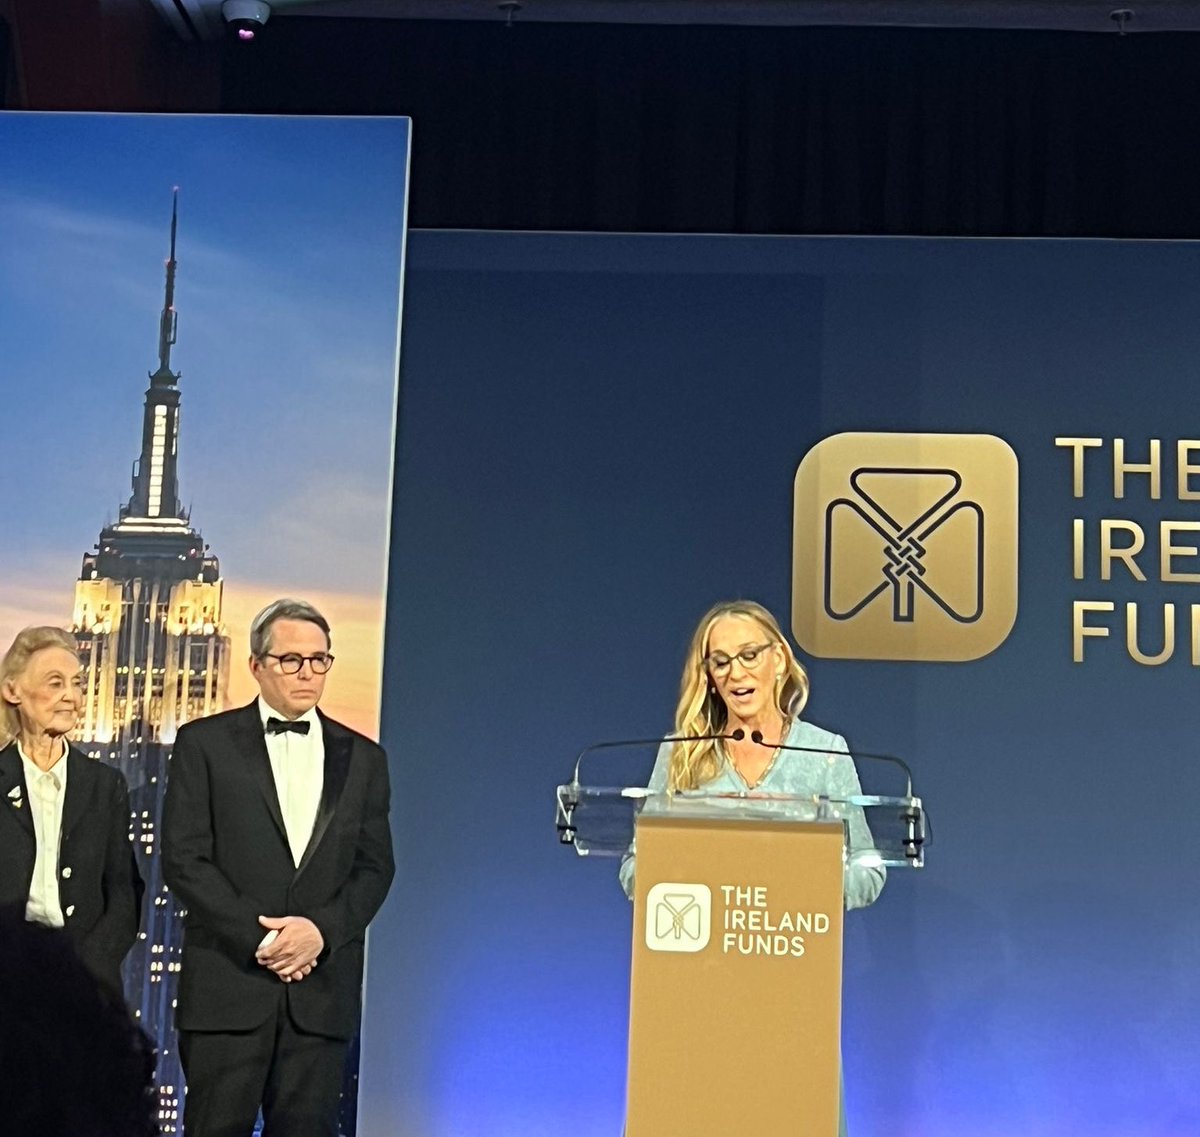 What a great night in NYC! Tremendous turnout for @IrelandFundsAM 46th Gala honouring friends of Ireland Sarah Jessica Parker @SJP, Matthew Broderick and @lynnmartin @NYSE.